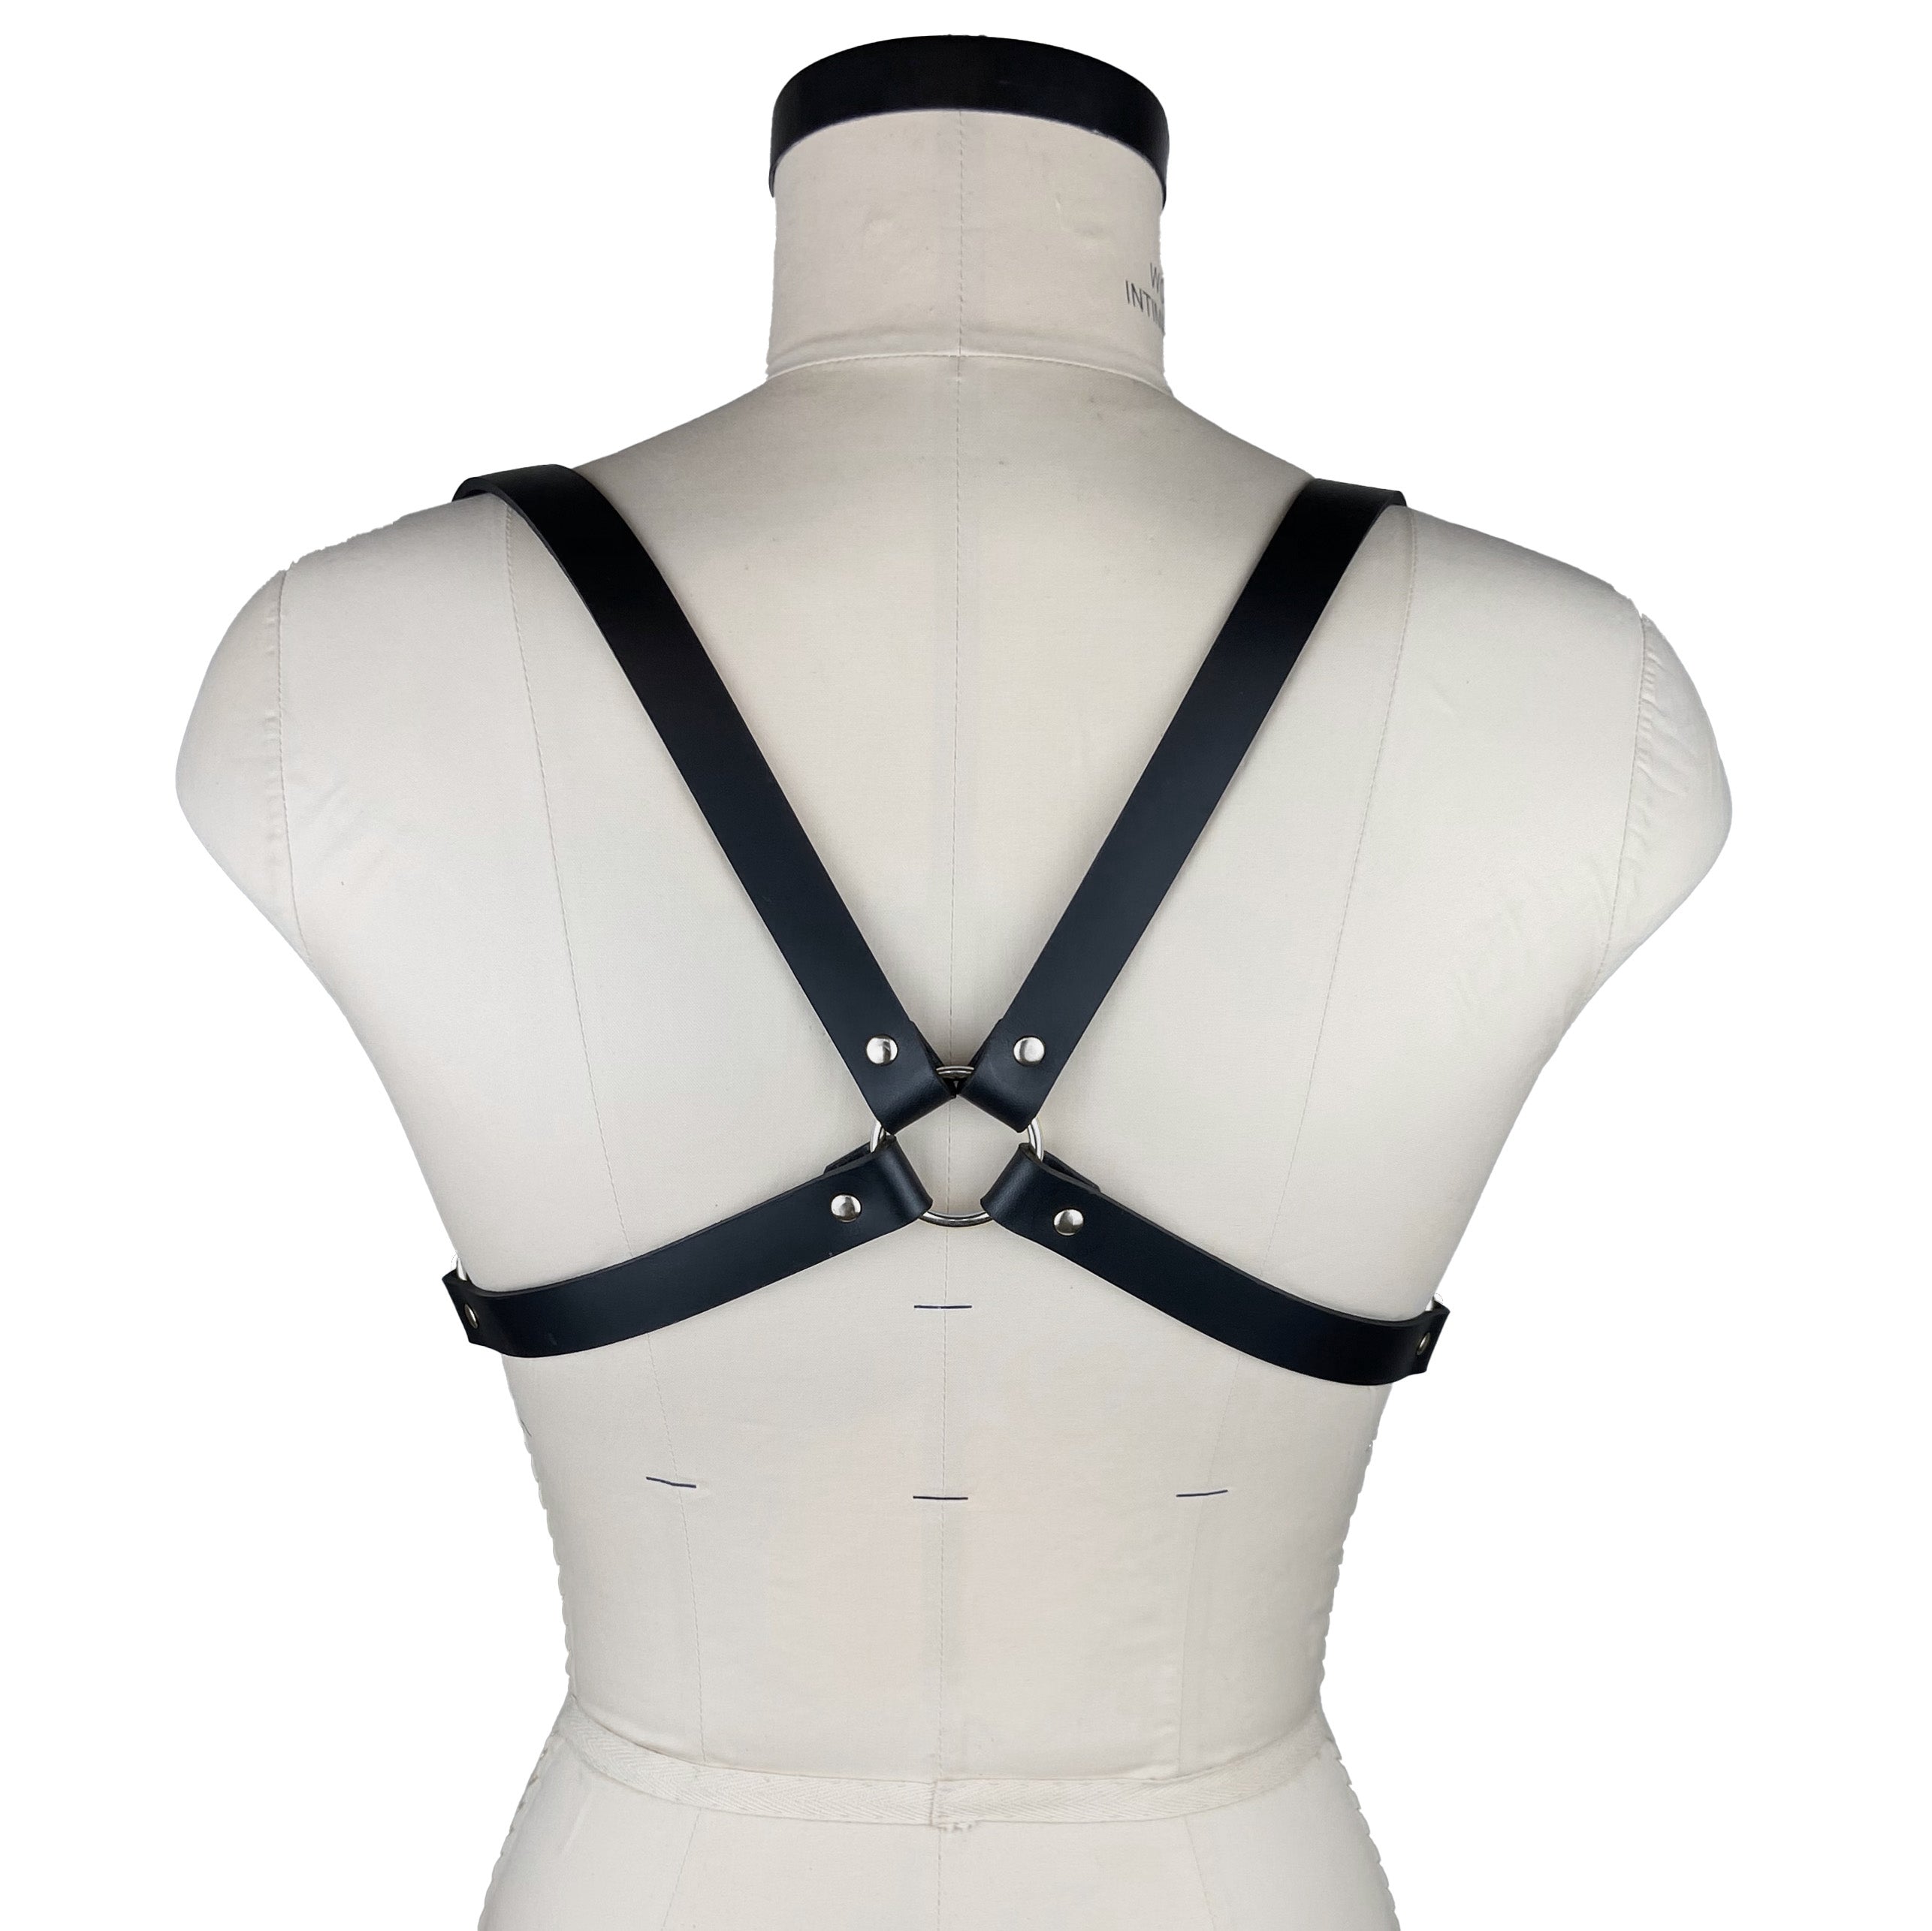 luxury Italian leather fashion and fetish women's men's gemma harness, bespoke, made-to-order in nyc, back view